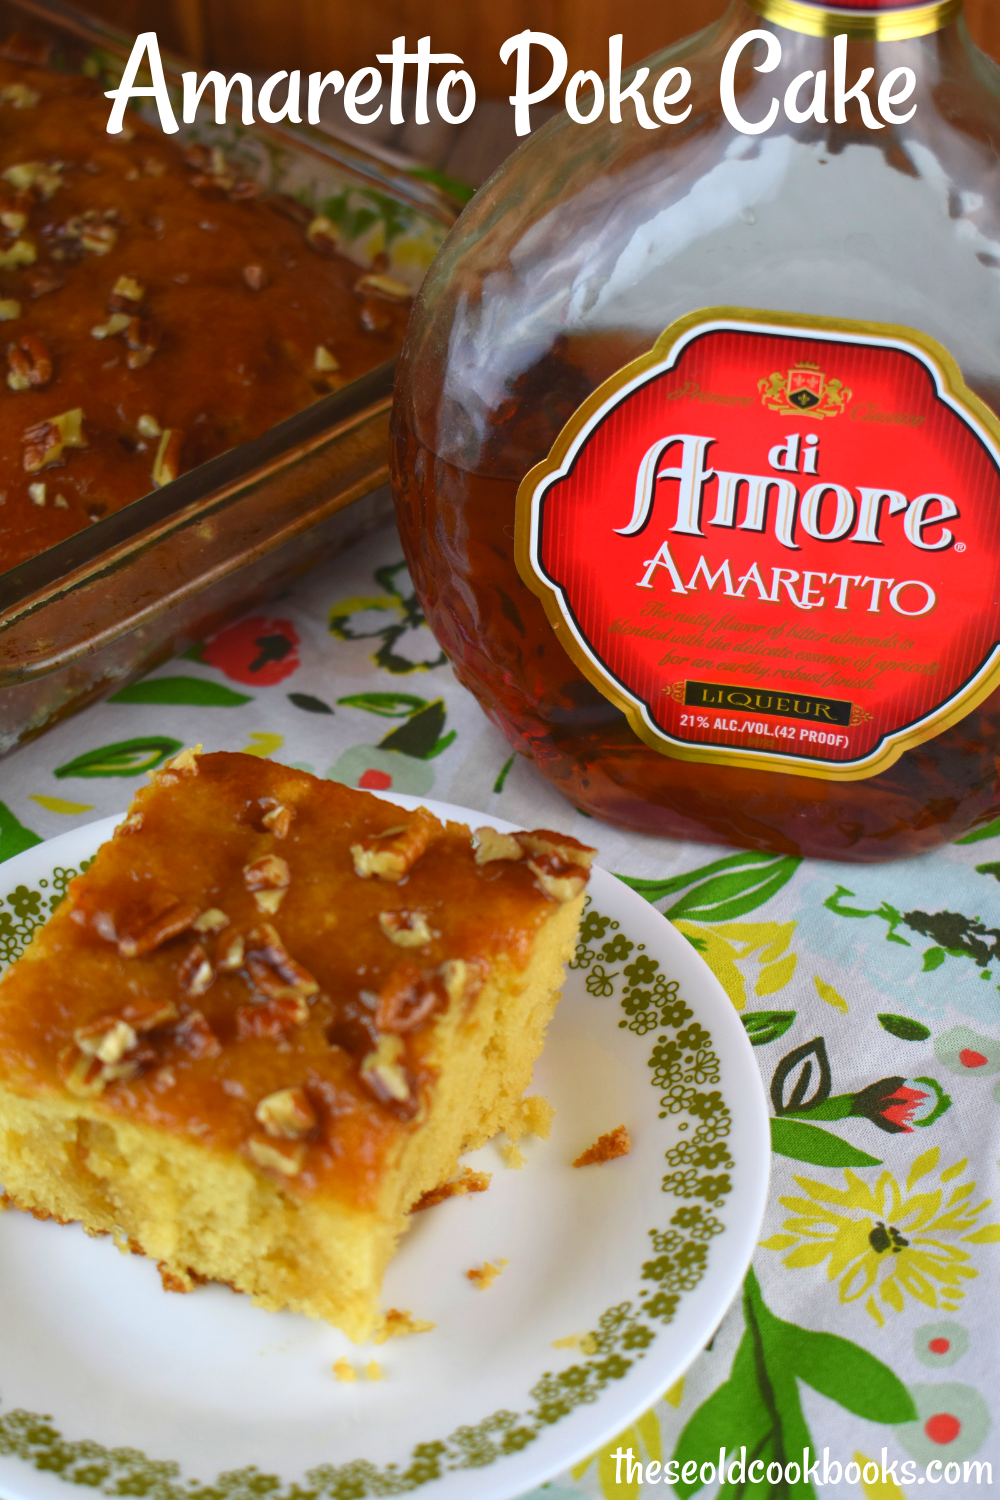 Amaretto Poke Cake isn't just for Amaretto lovers.  It's a moist cake that pairs great with coffee for breakfast or makes the most delicious dessert for all ages. It features a decadent Amaretto glaze that is poured over an amped up box caked mix.